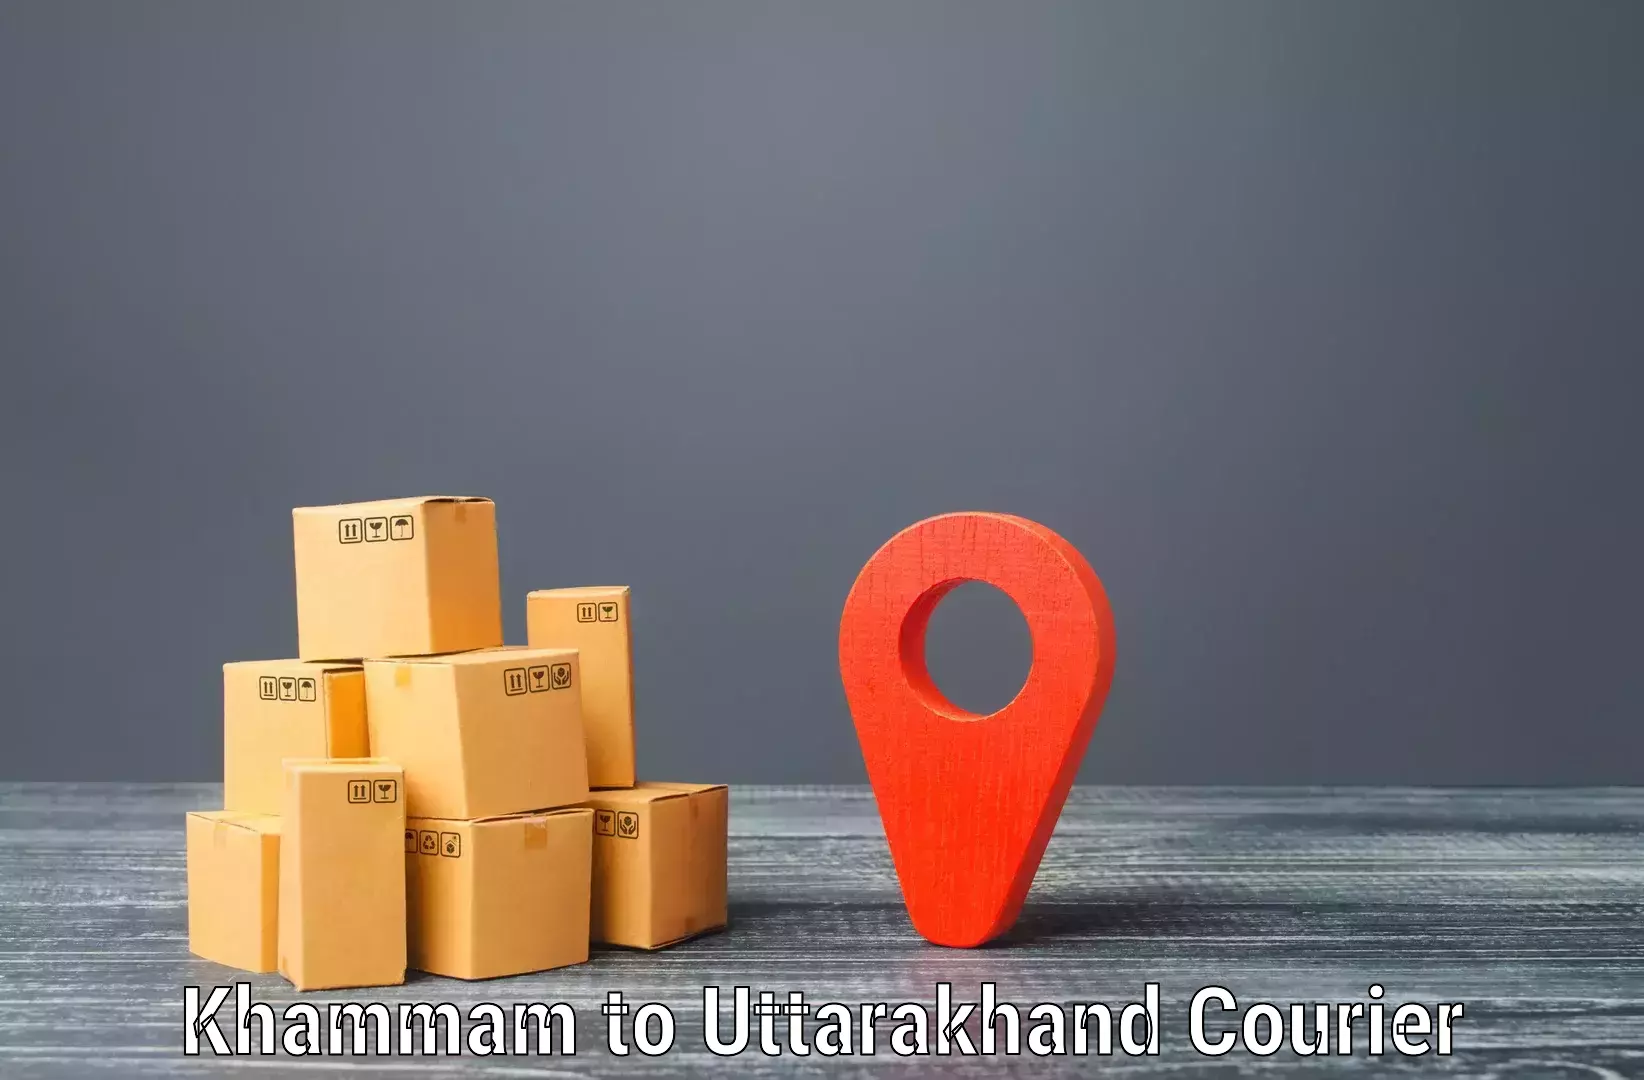 State-of-the-art courier technology Khammam to Paithani